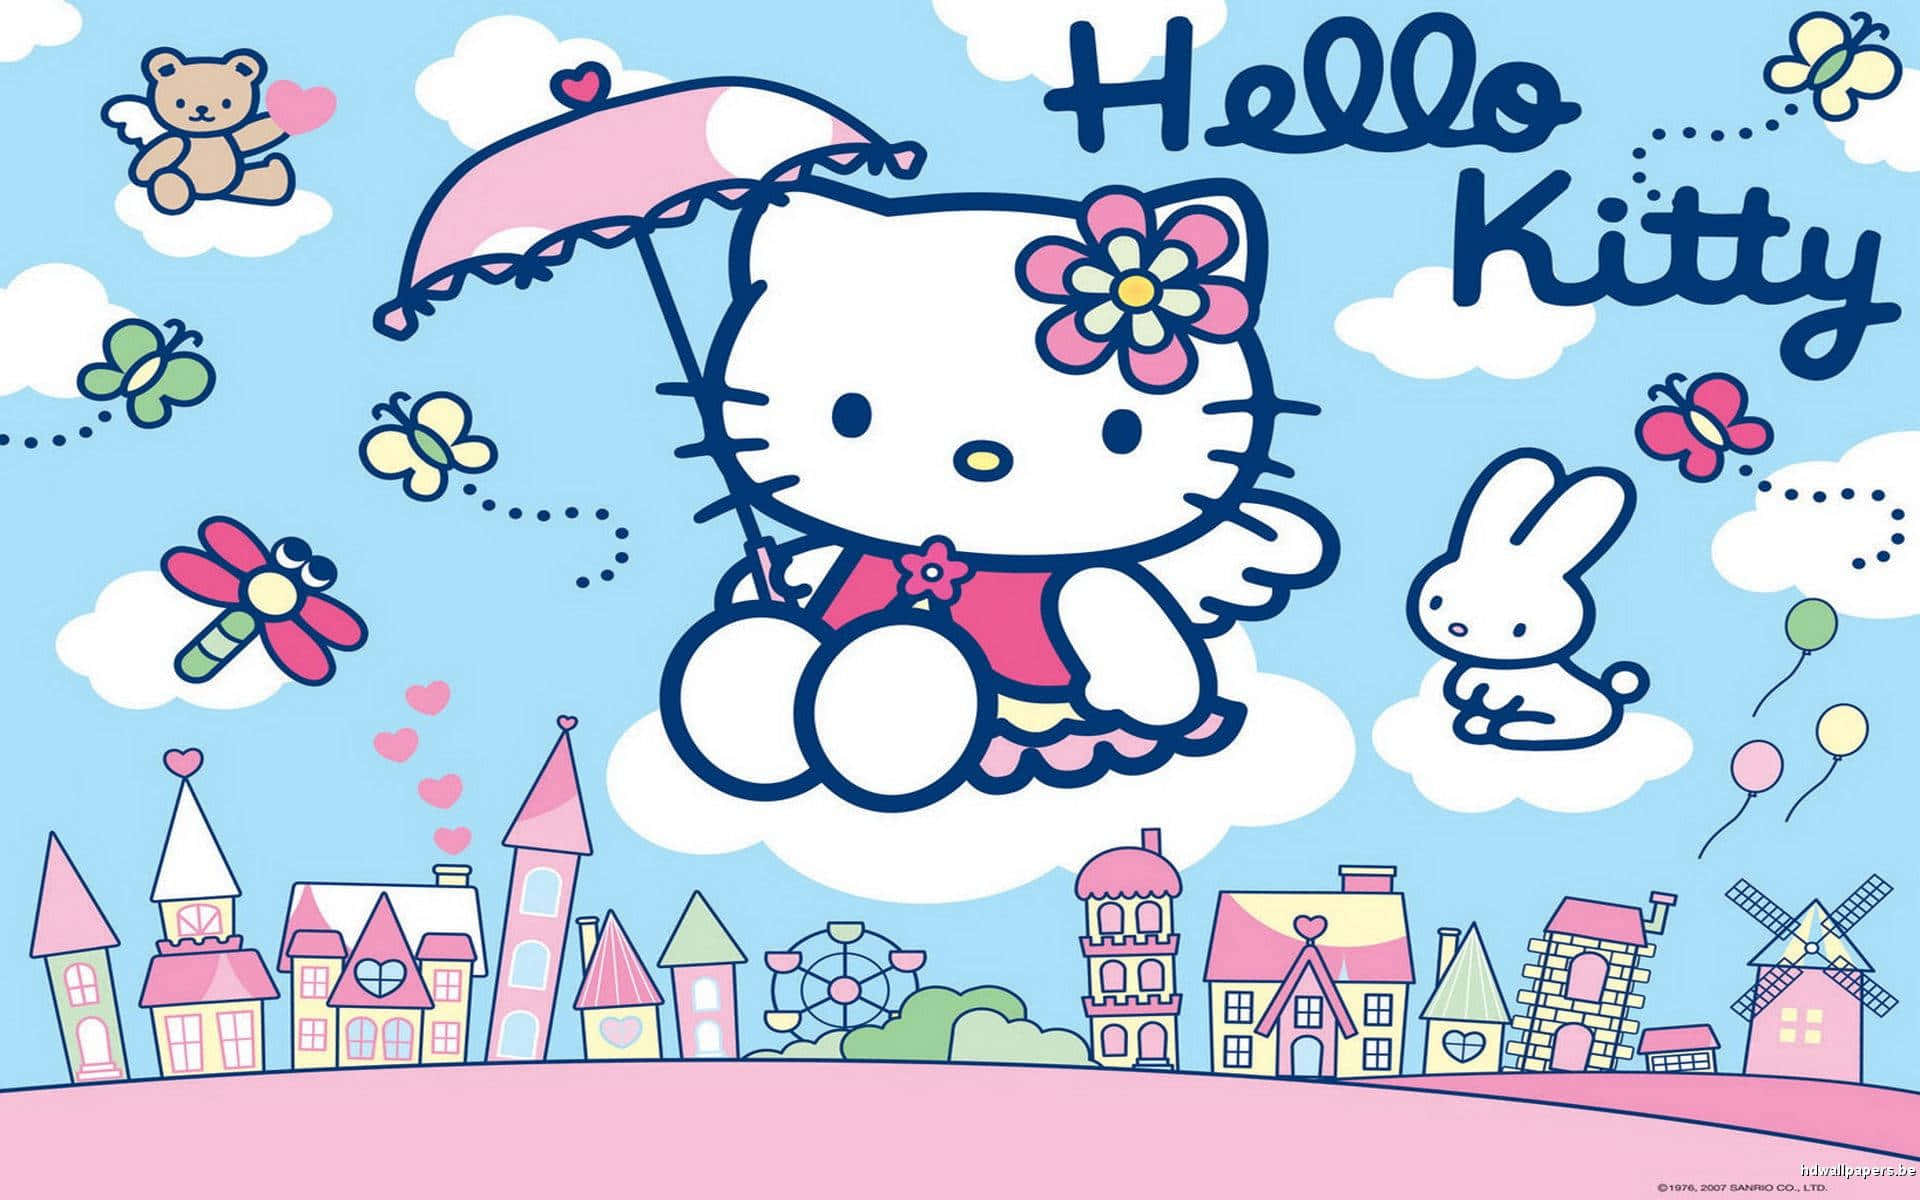 Say hello to the classic Hello Kitty PC Wallpaper